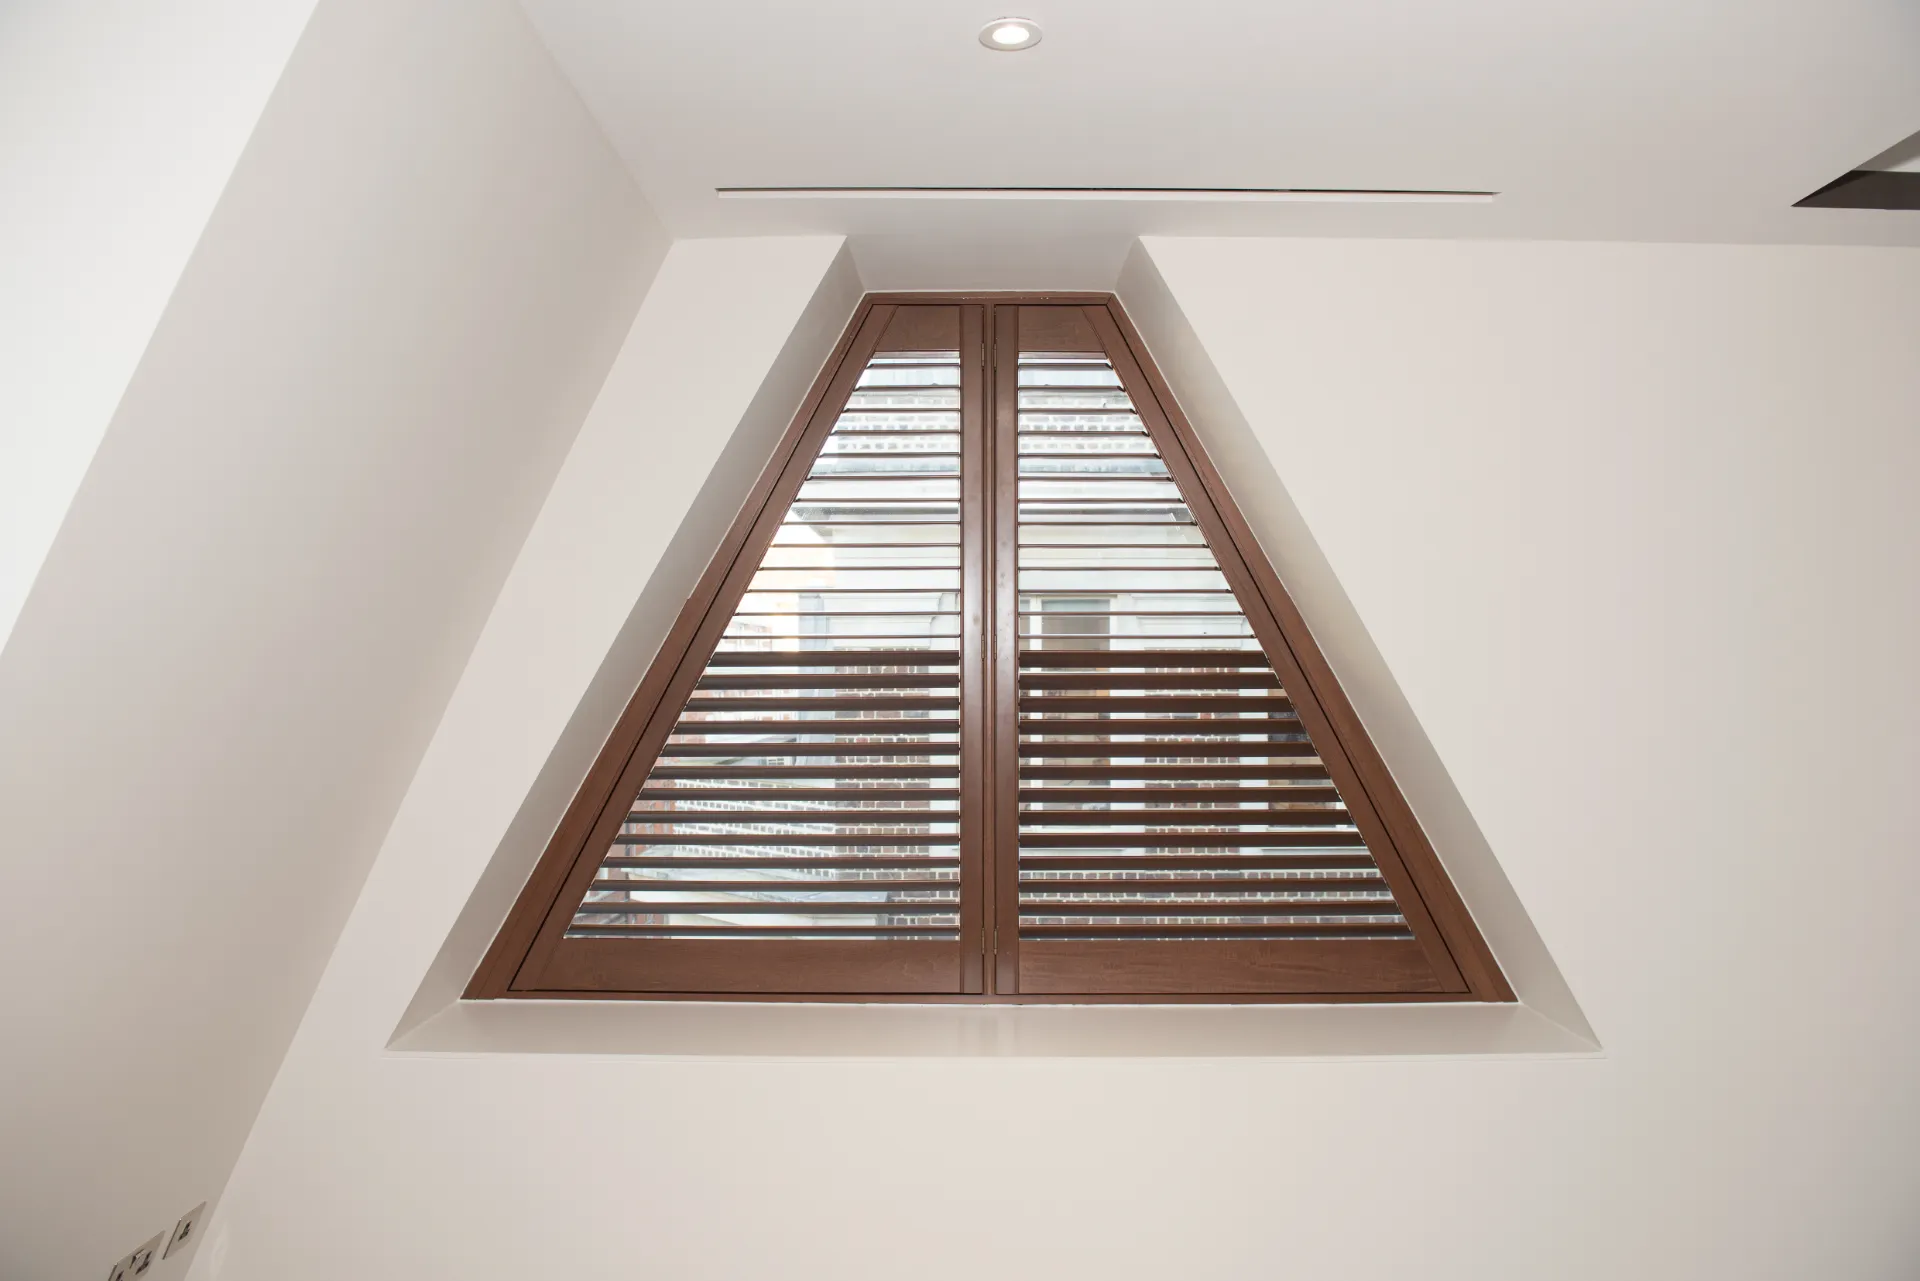 triangular plantation shutters in a walnut stained colour